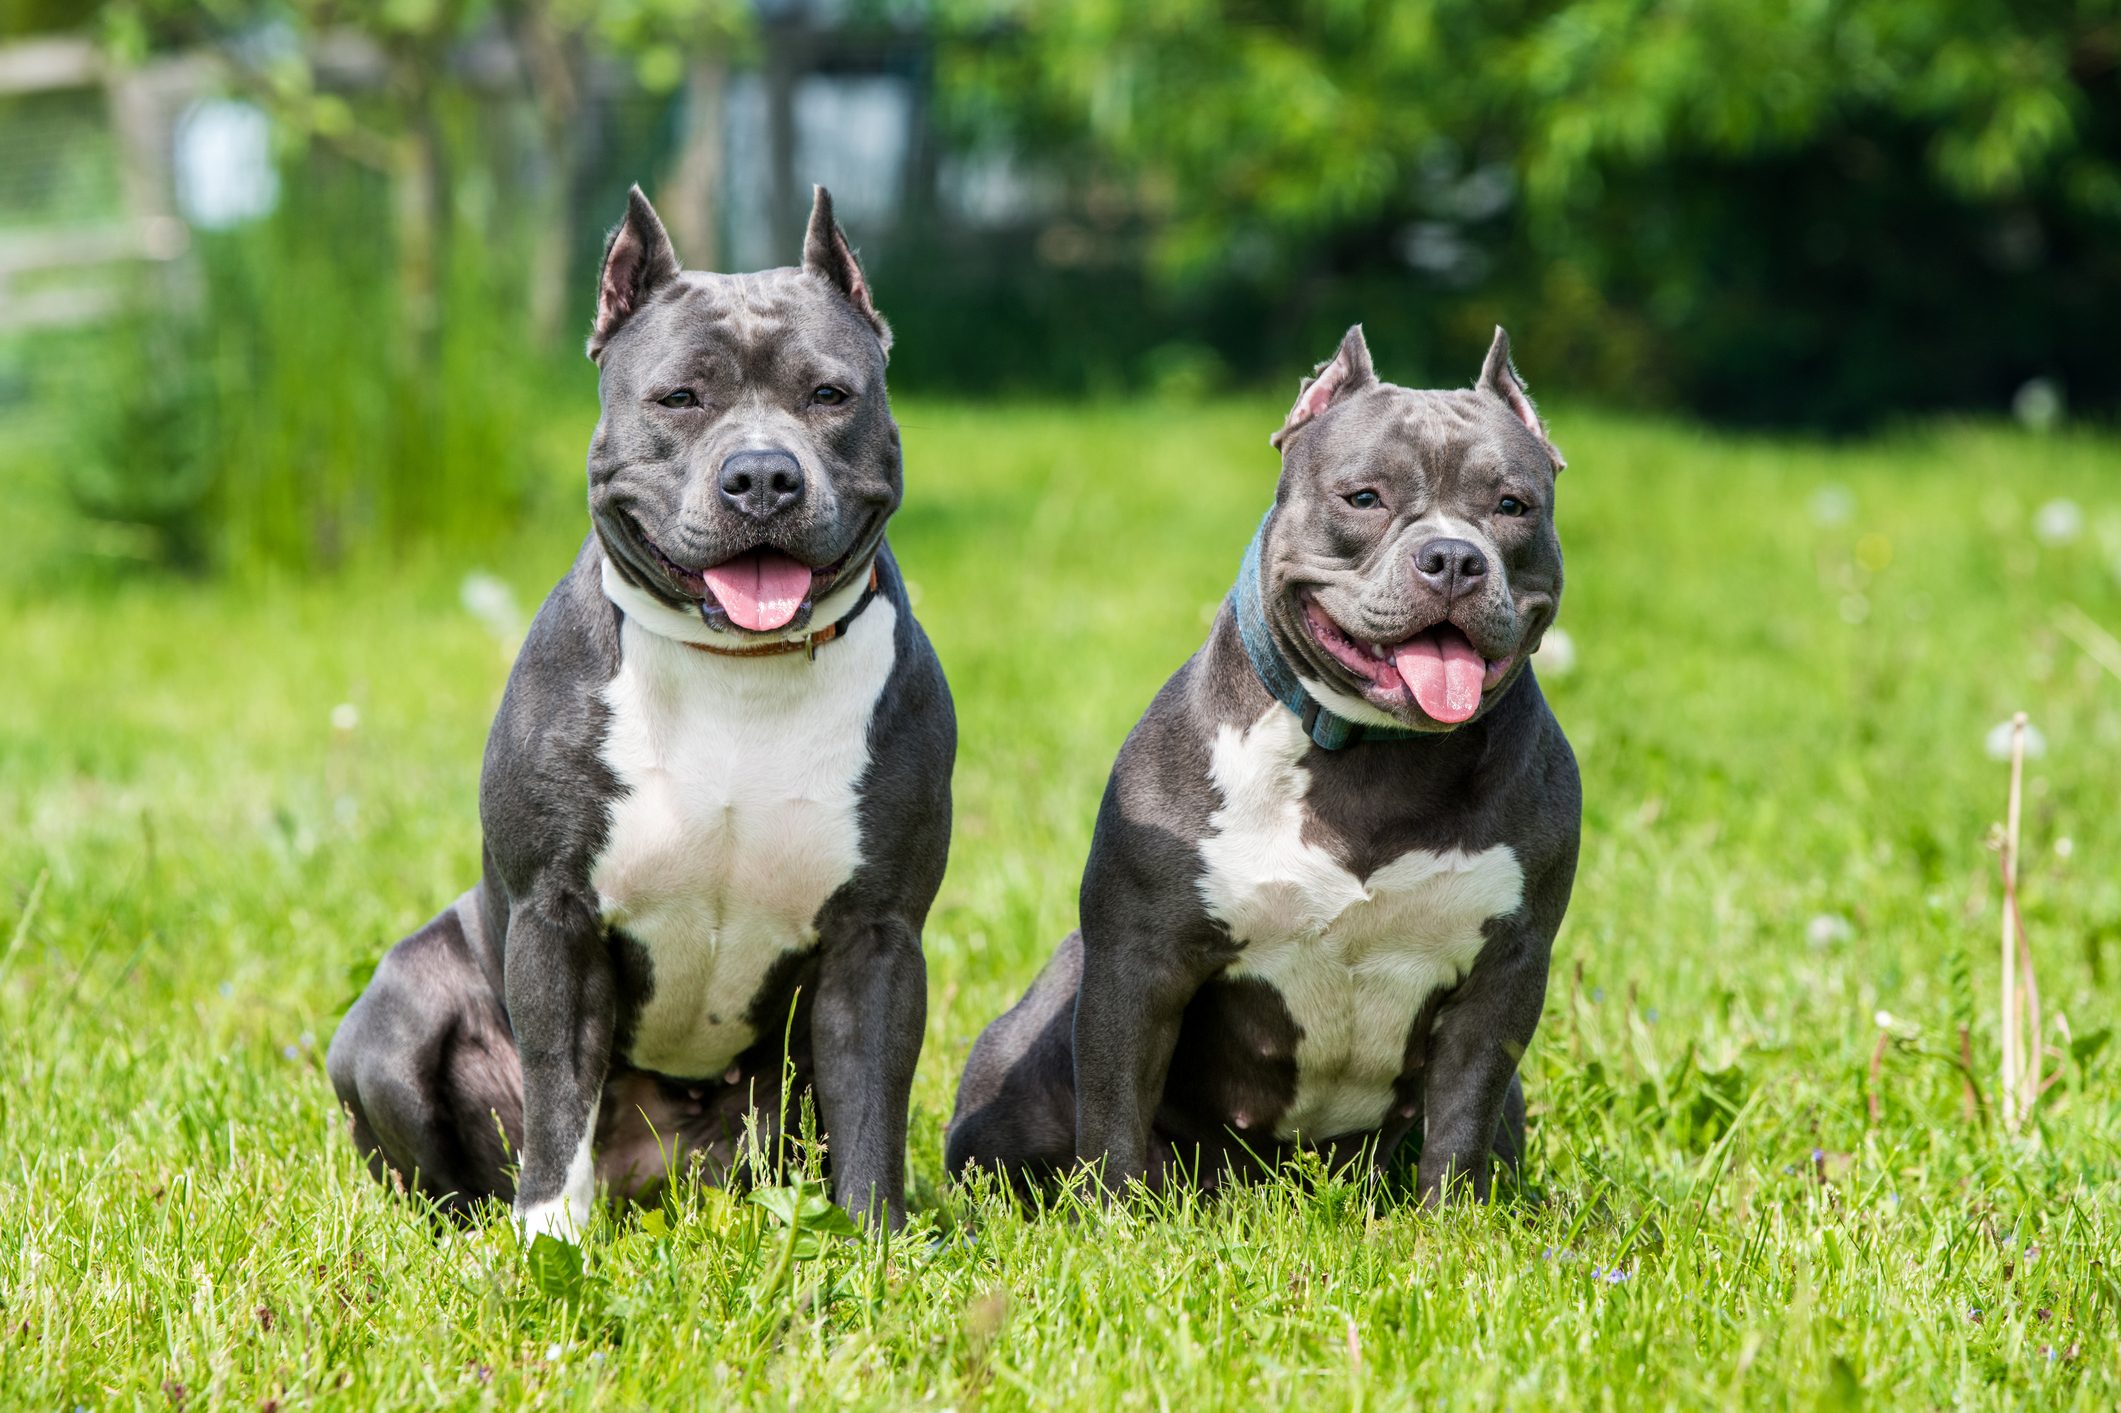 Are Pit Bulls Dangerous? Experts Debunk 8 Myths About The Dogs